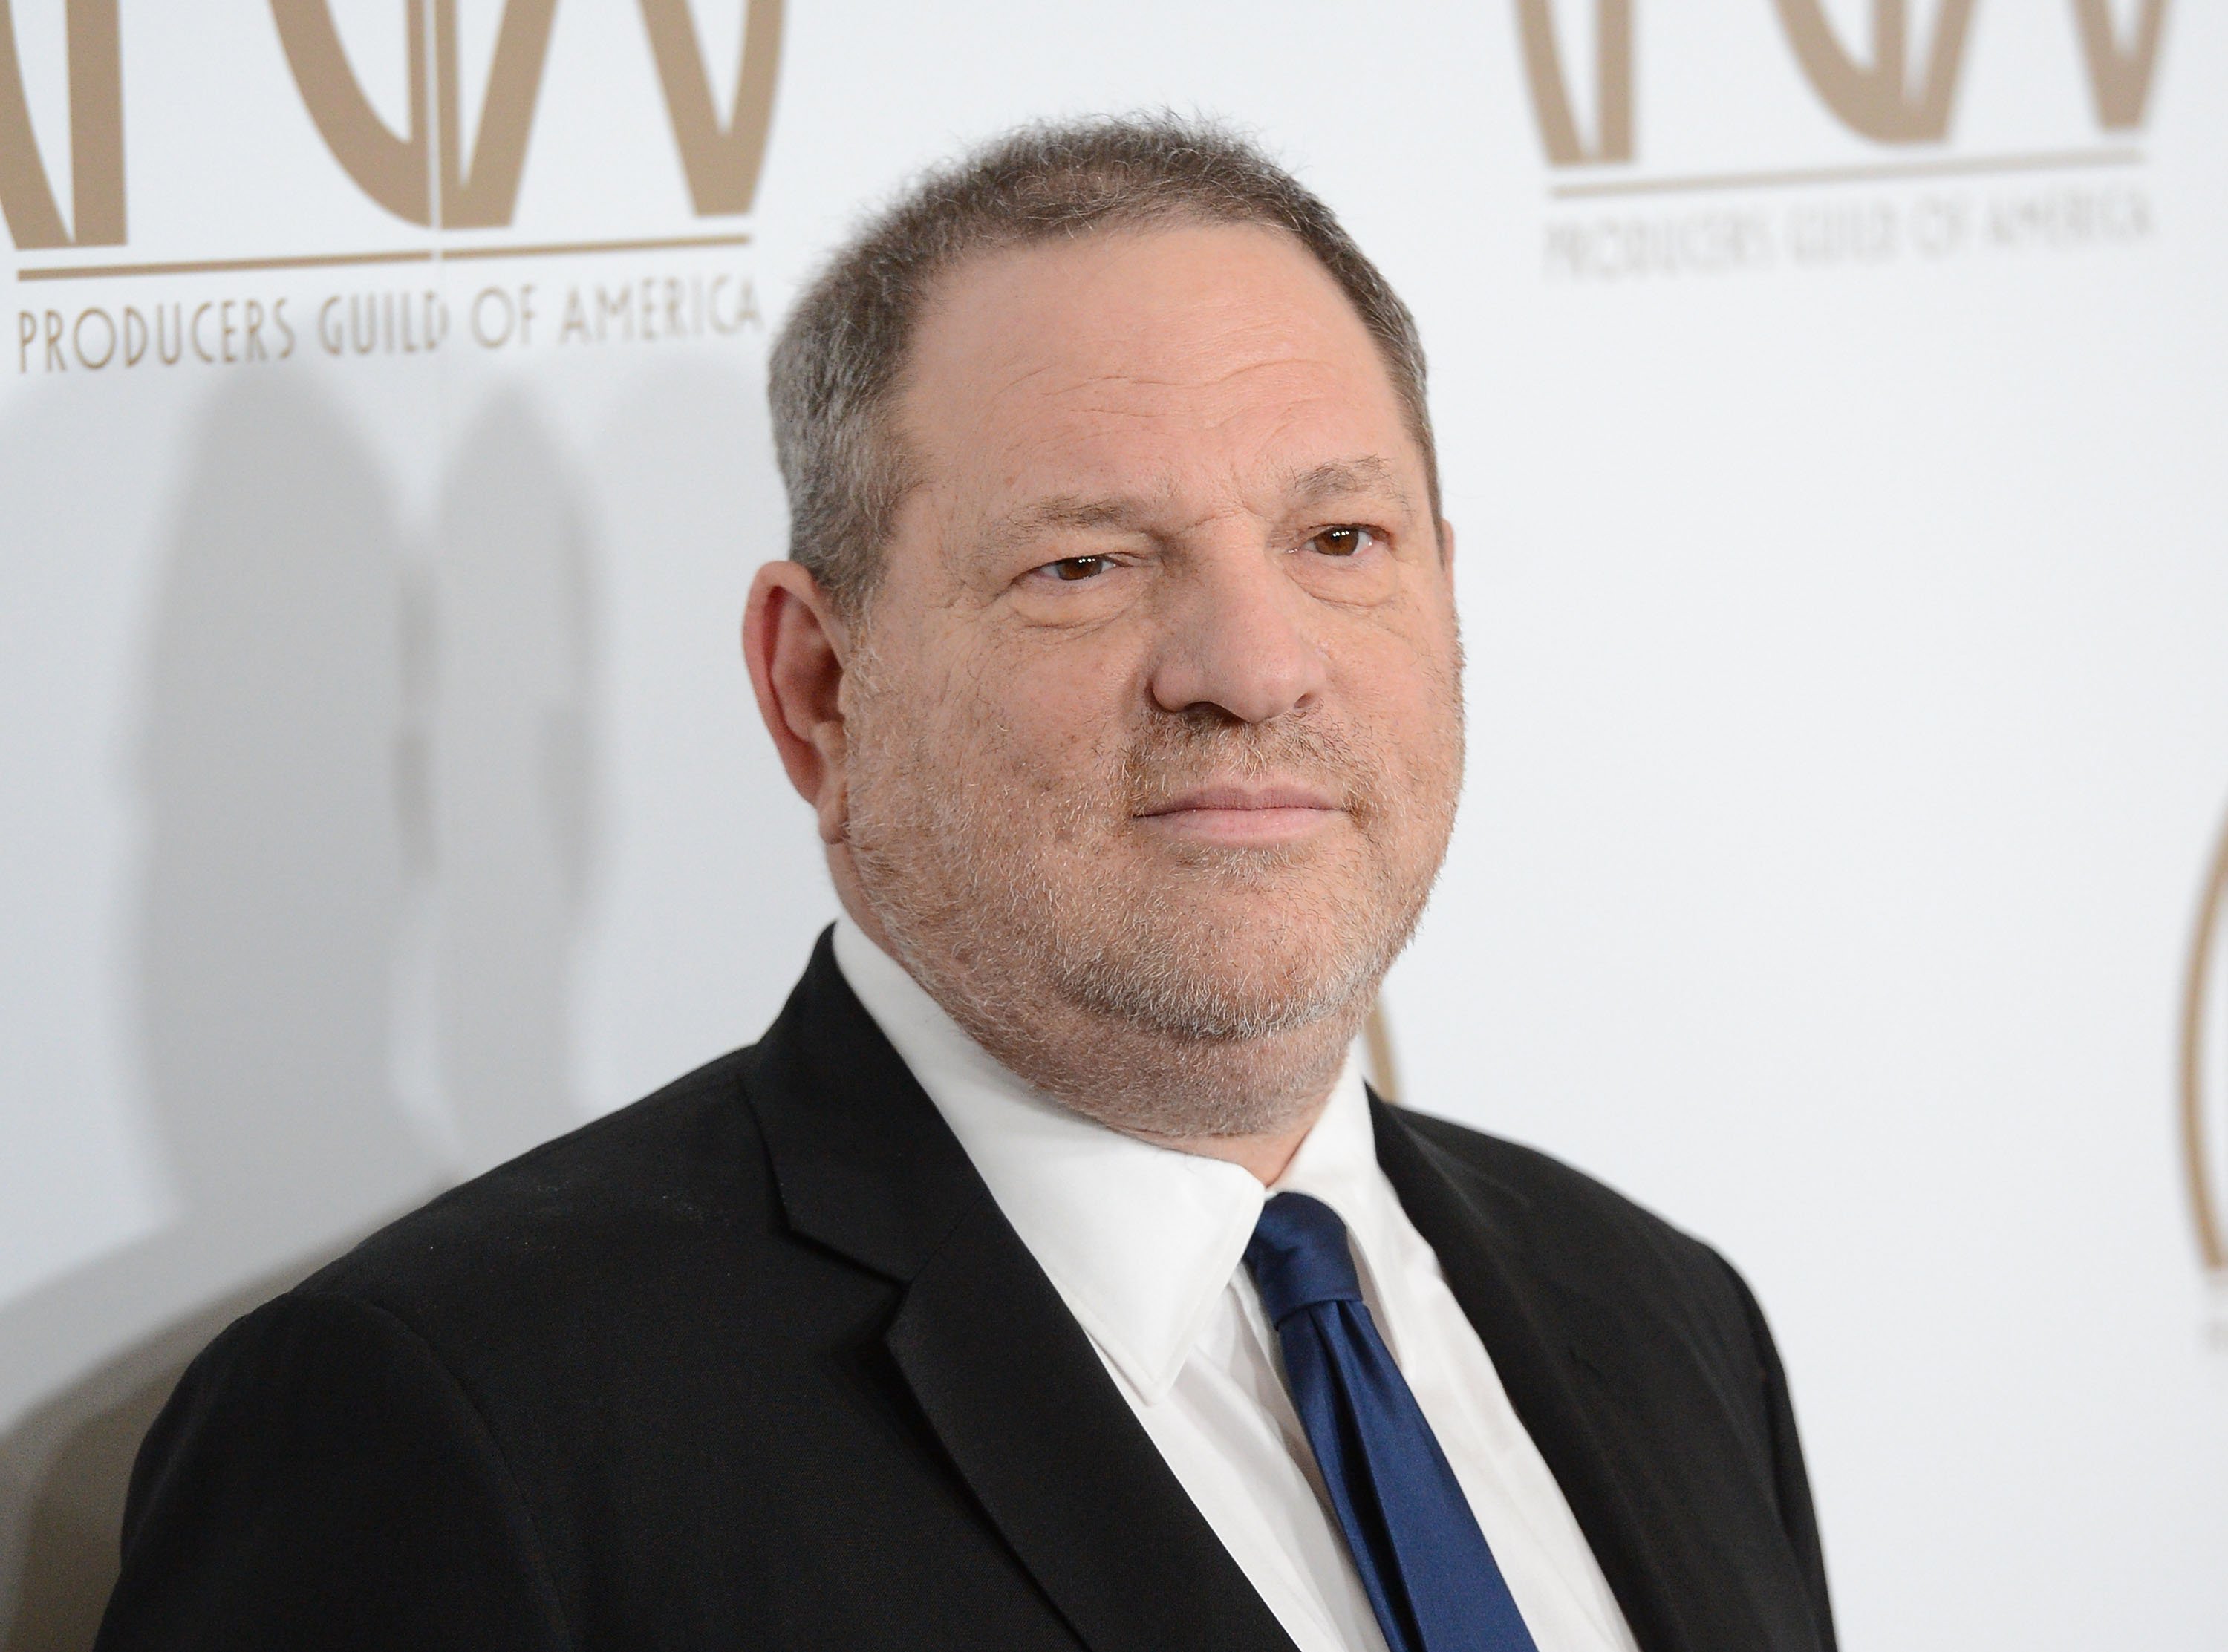  Harvey Weinstein arrives at the 24th Annual Producers Guild Awards on January 26, 2013. | Source: Getty Images